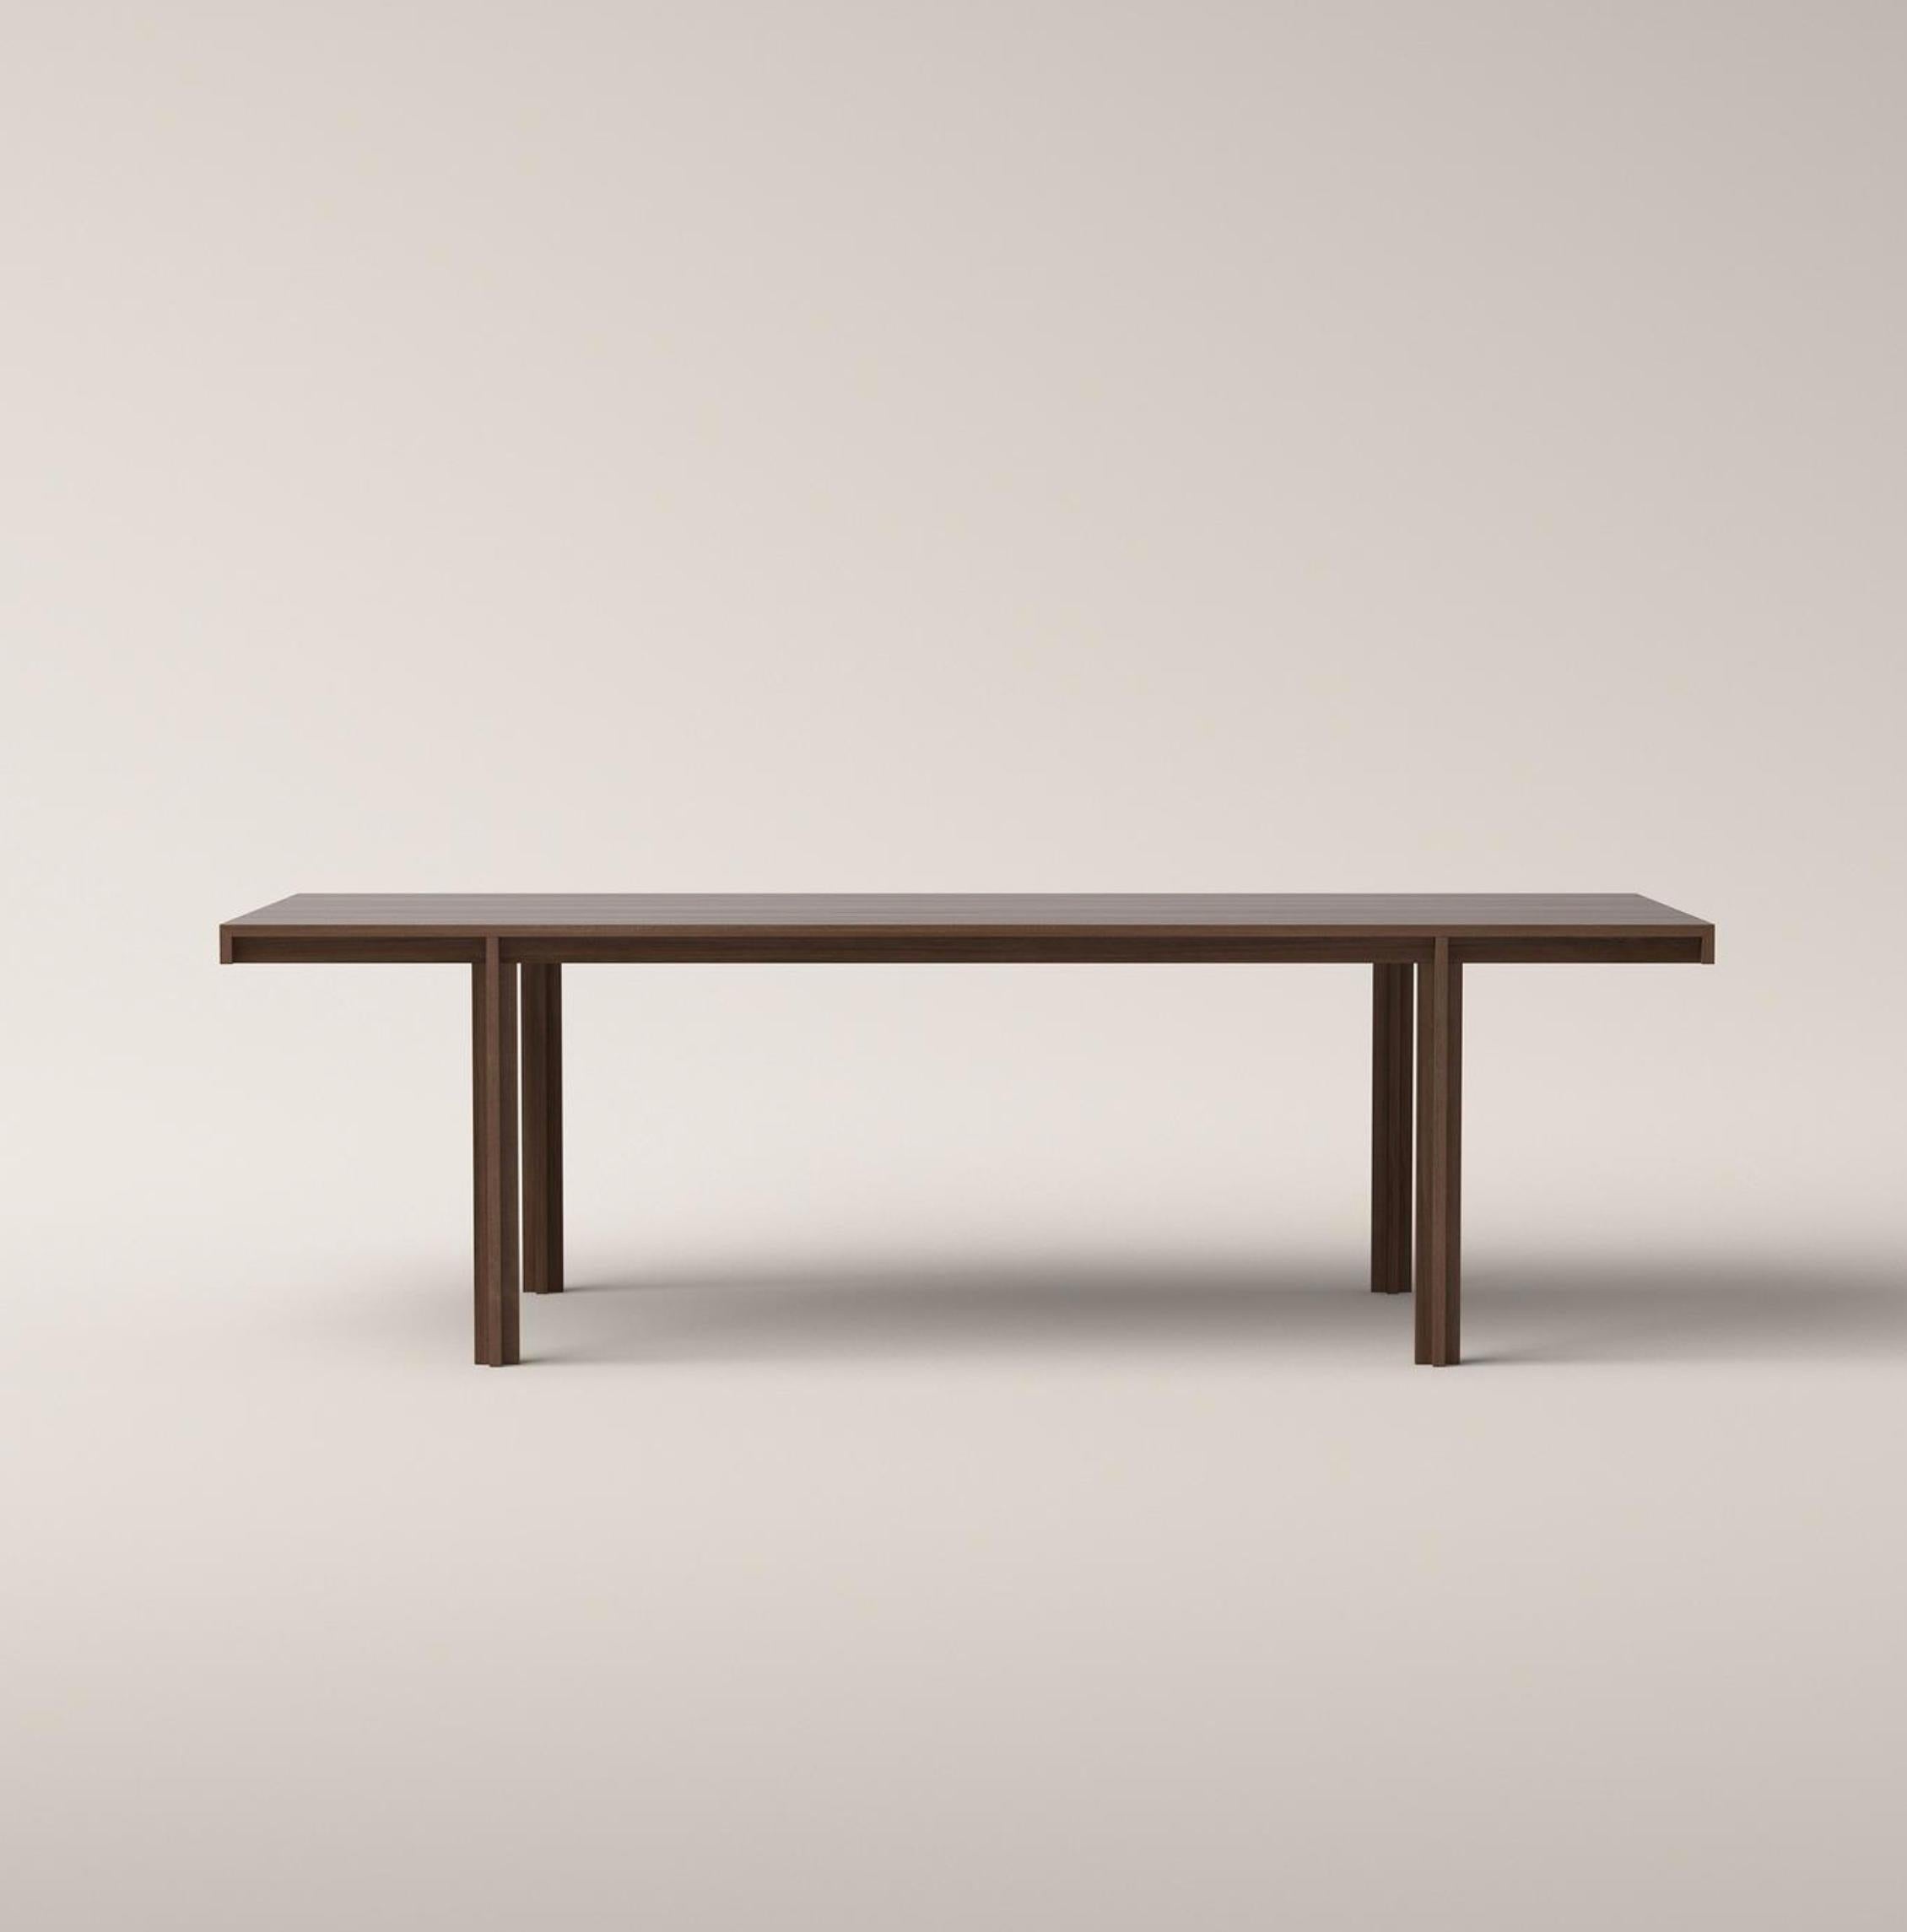 Table designed by Bodil Kjær in 1961. Available in natural oak, smoke stained oak, white stained oak or walnut. The price given applies to the table in oak, the table in walnut is available for 9.650€.